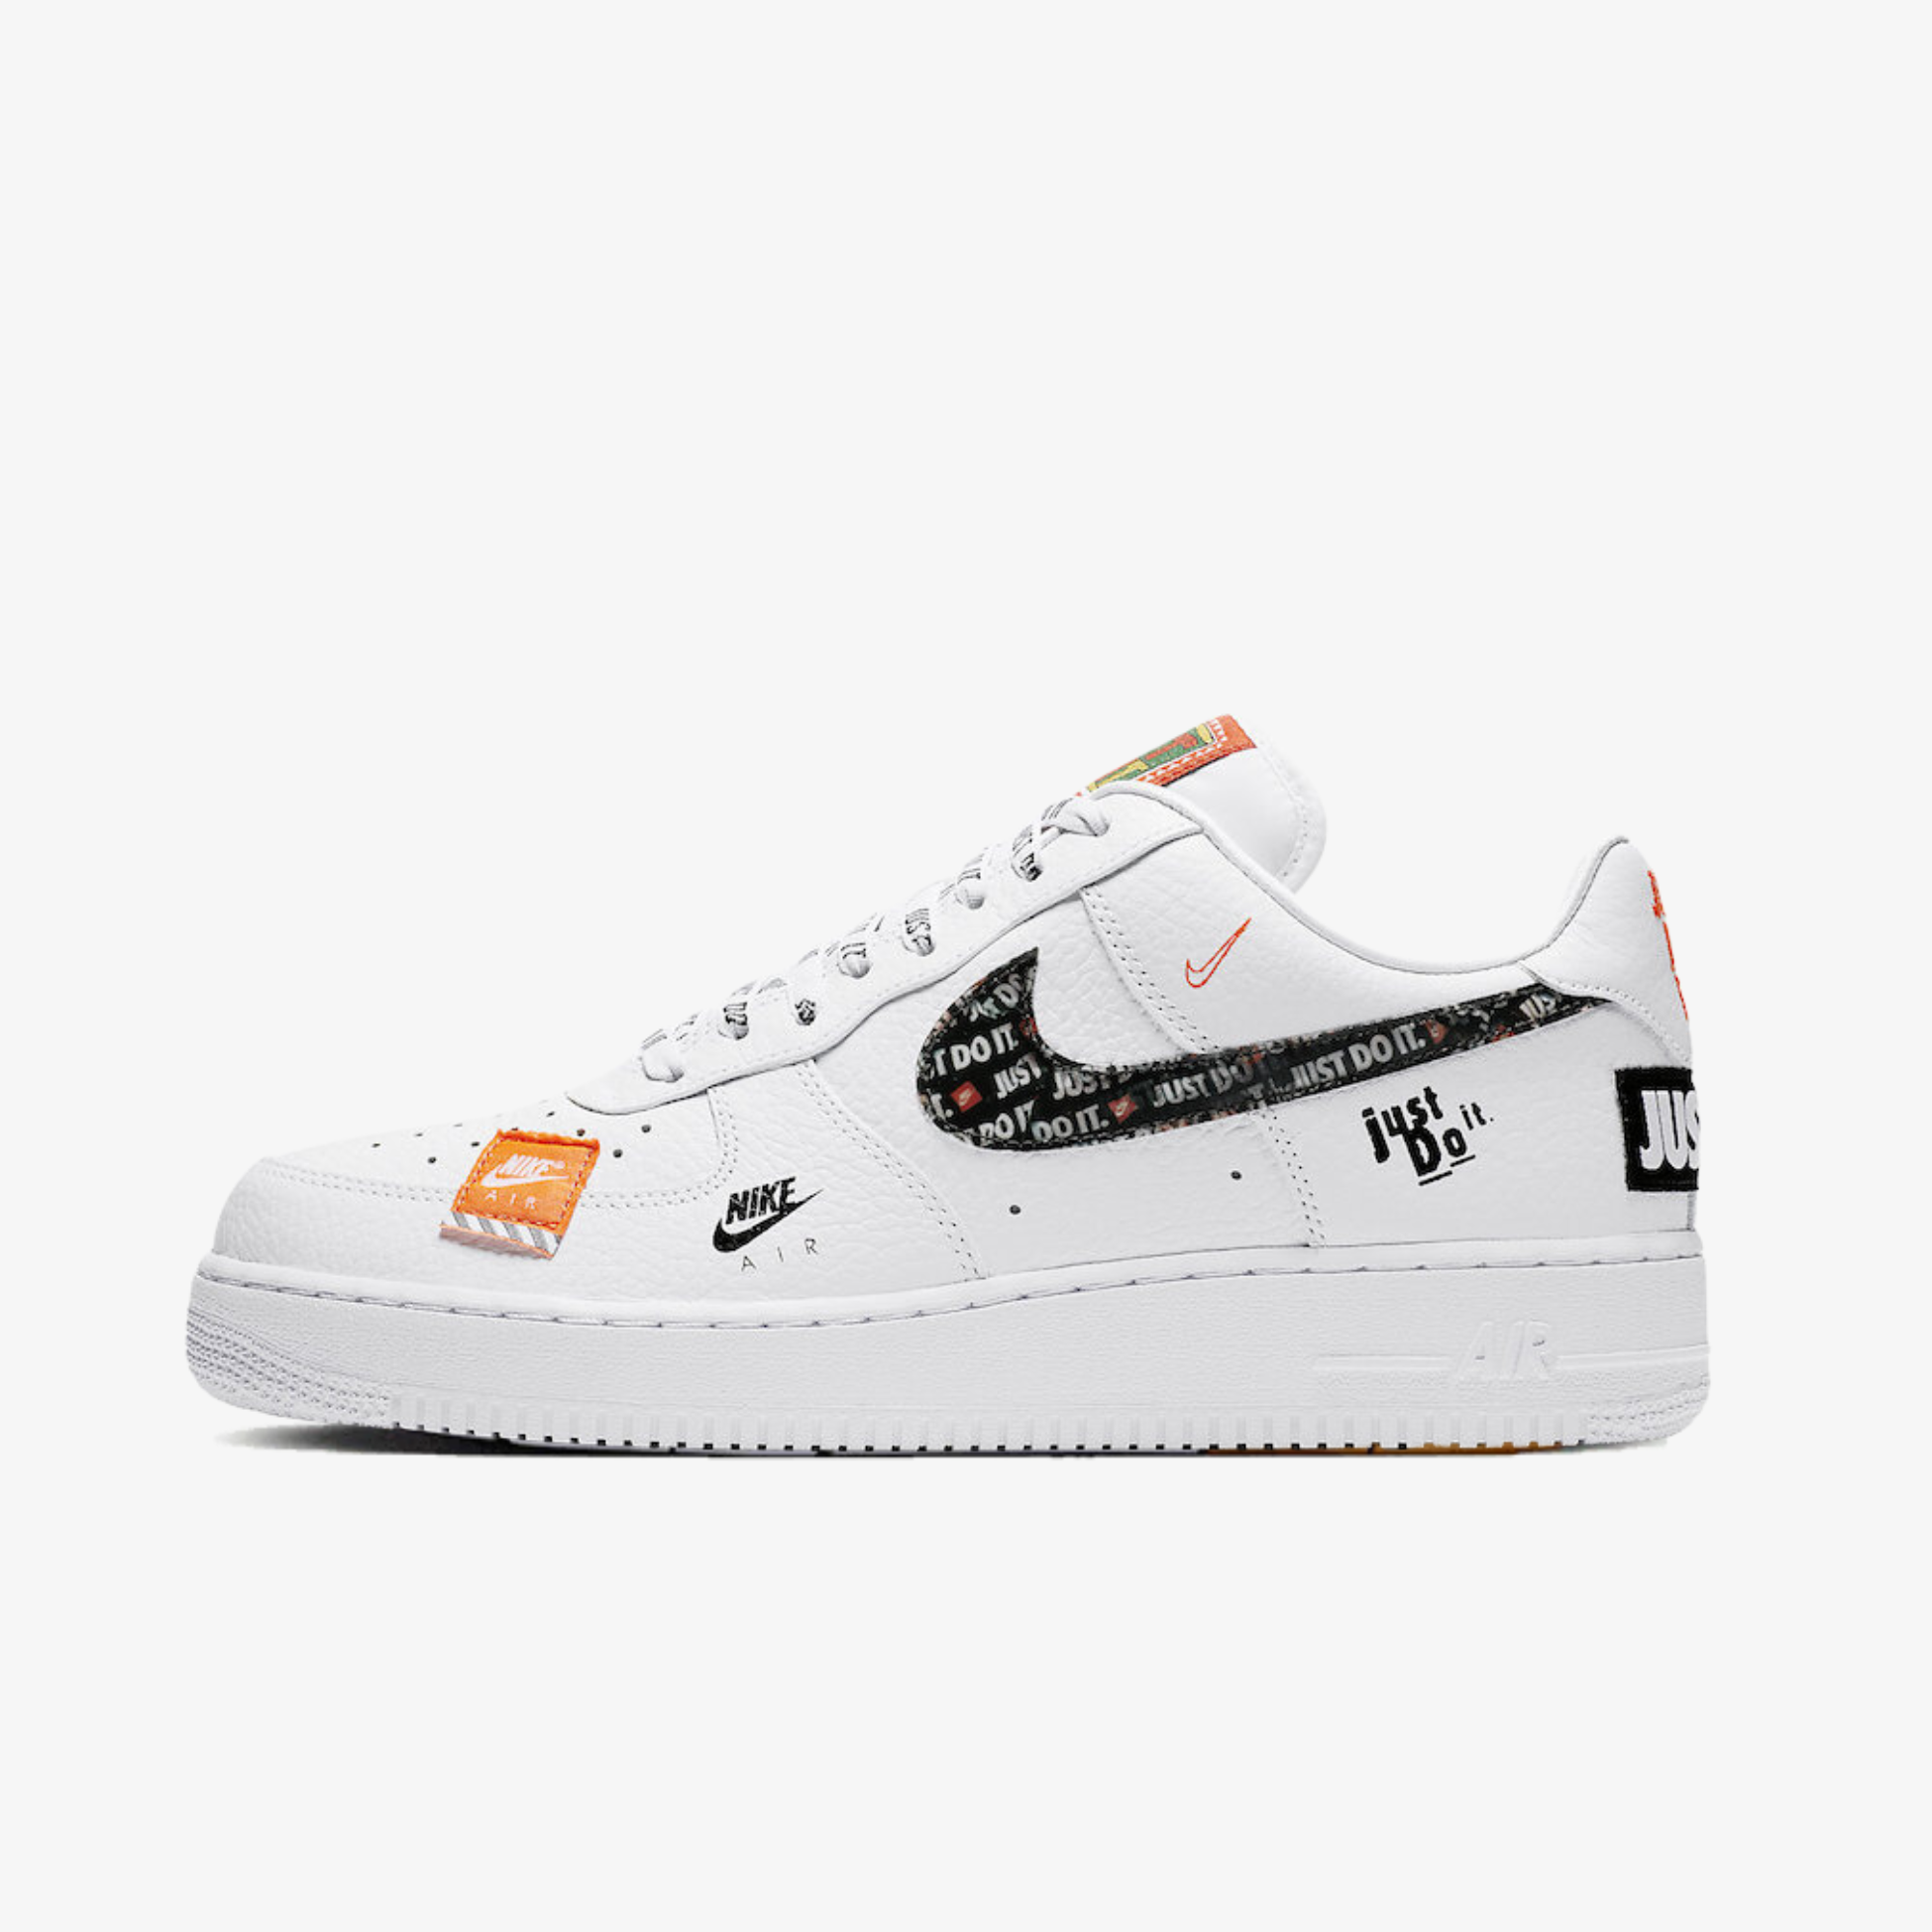 Nike Air Force 1 '07 PRM "Just Do It" Wit